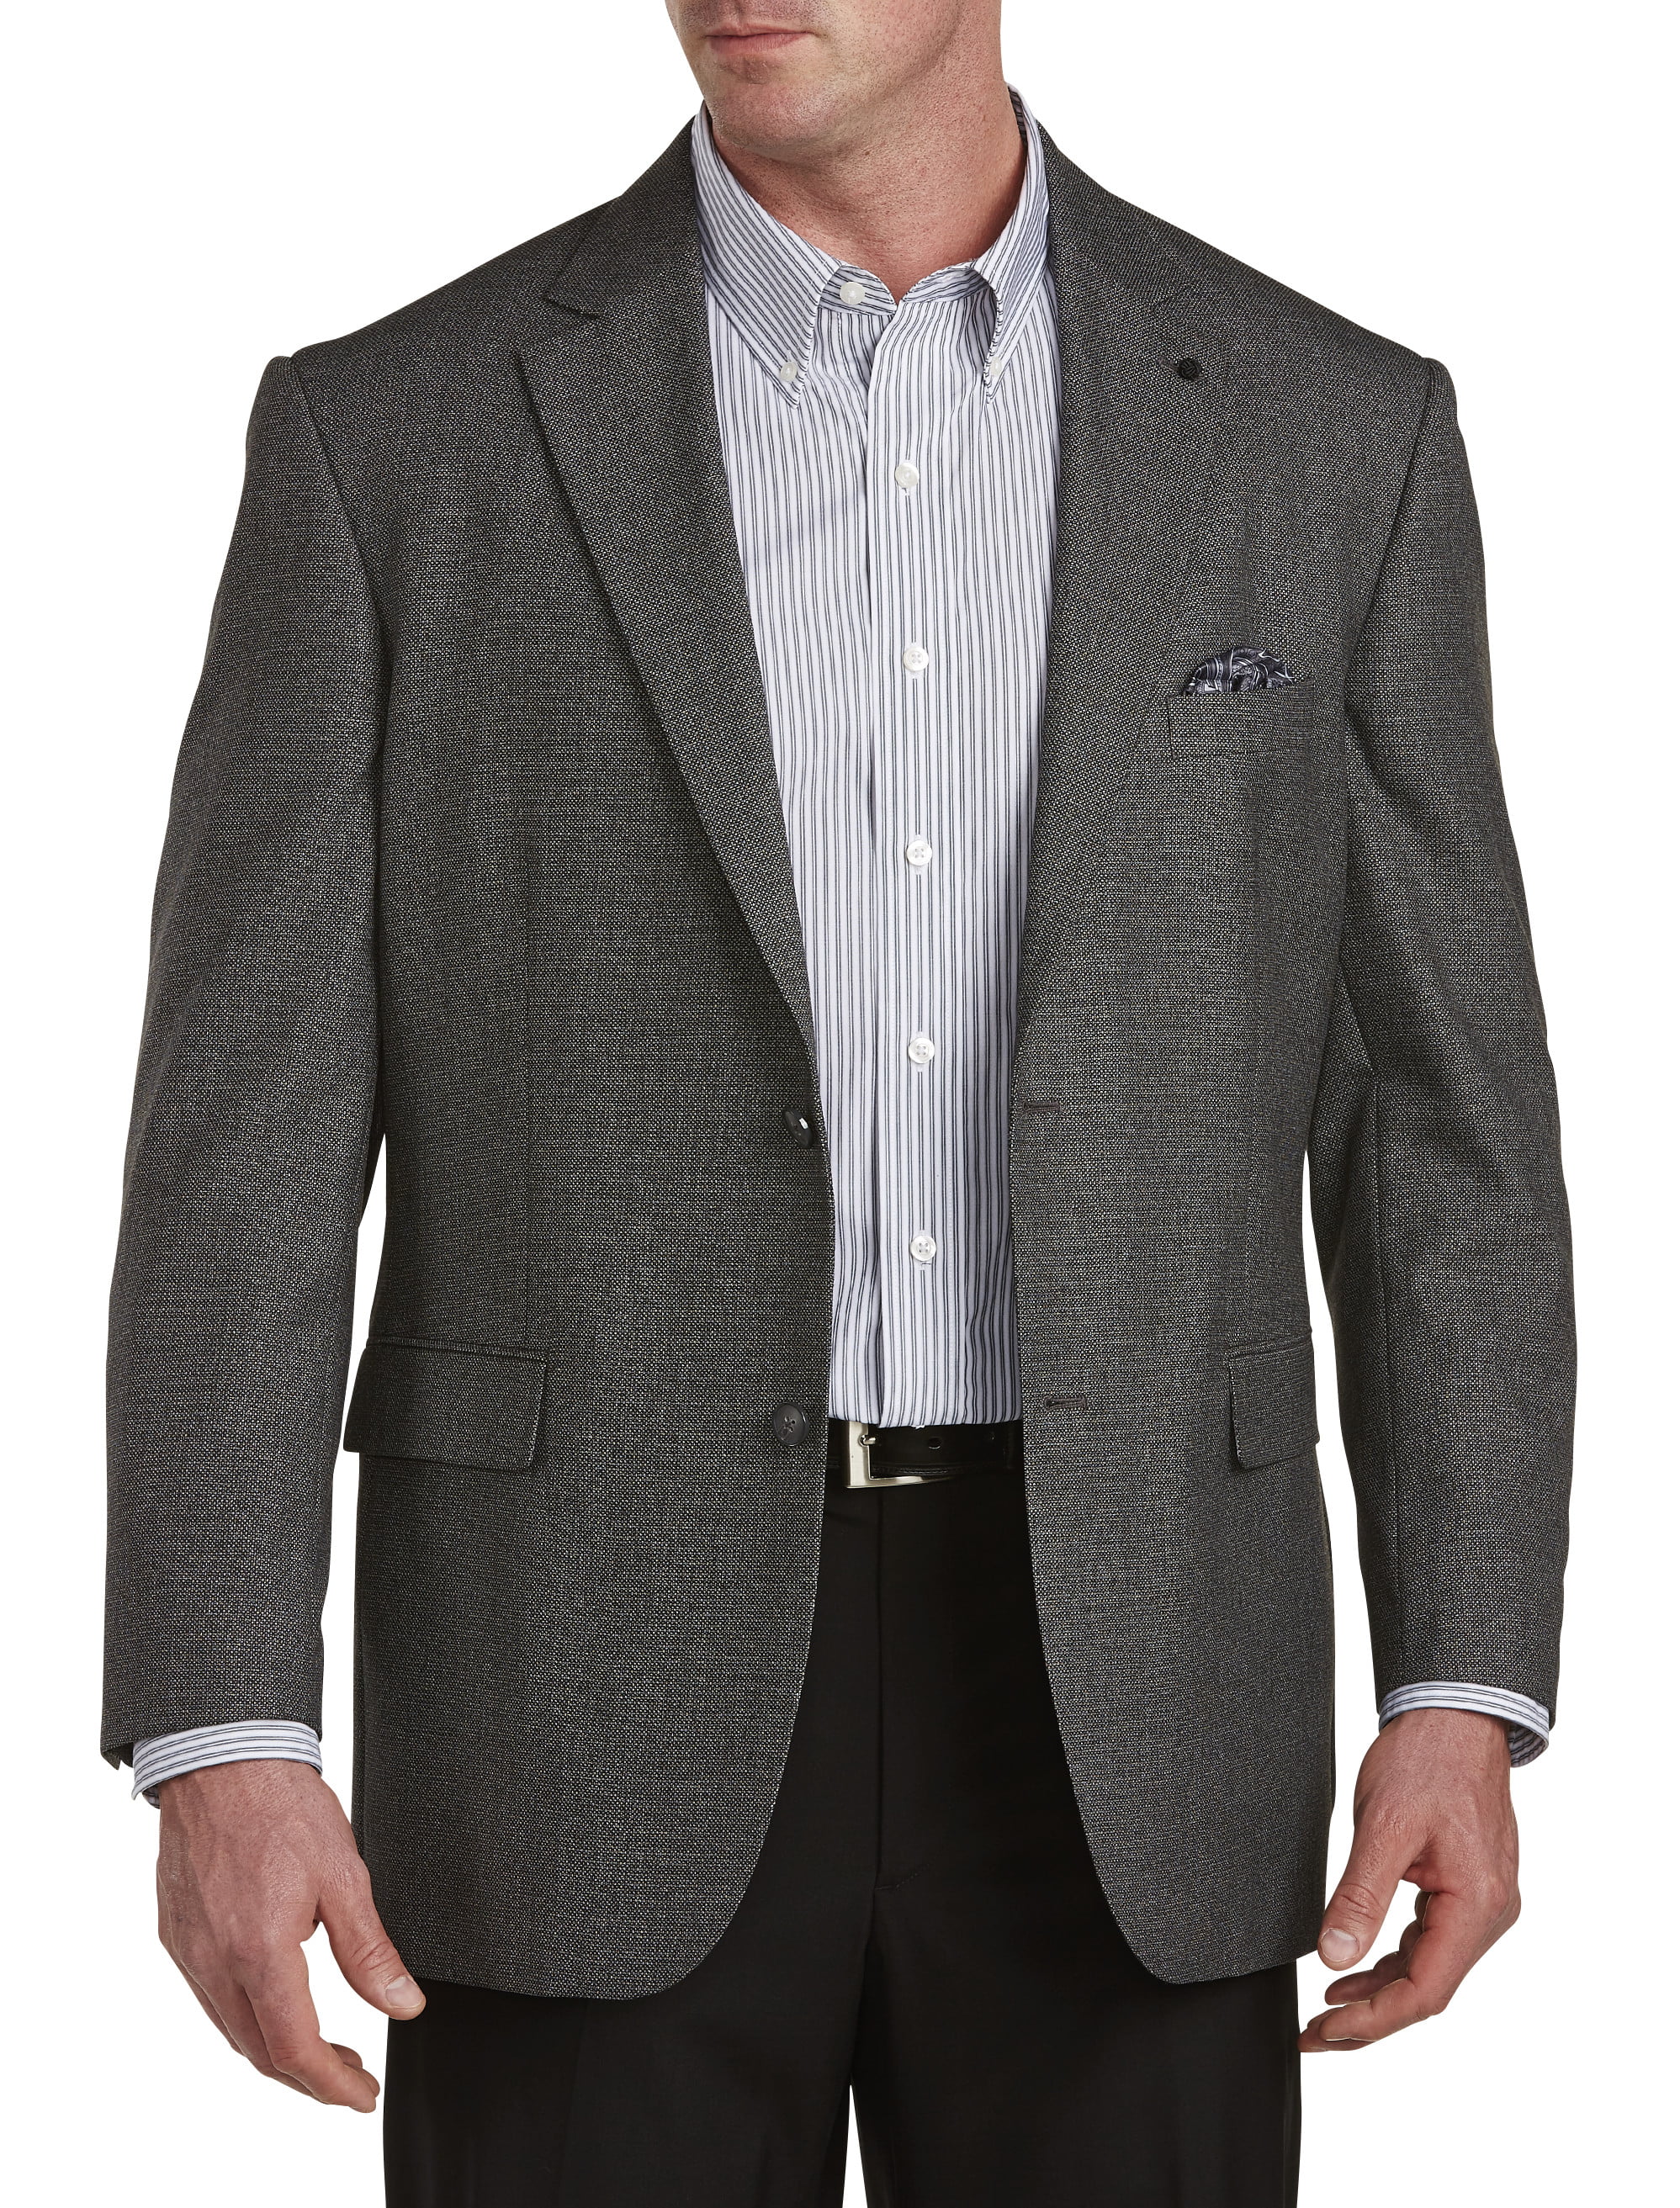 Oak Hill by DXL Big and Tall Jacket-Relaxer Seasonal Textured Solid Sport Coat 